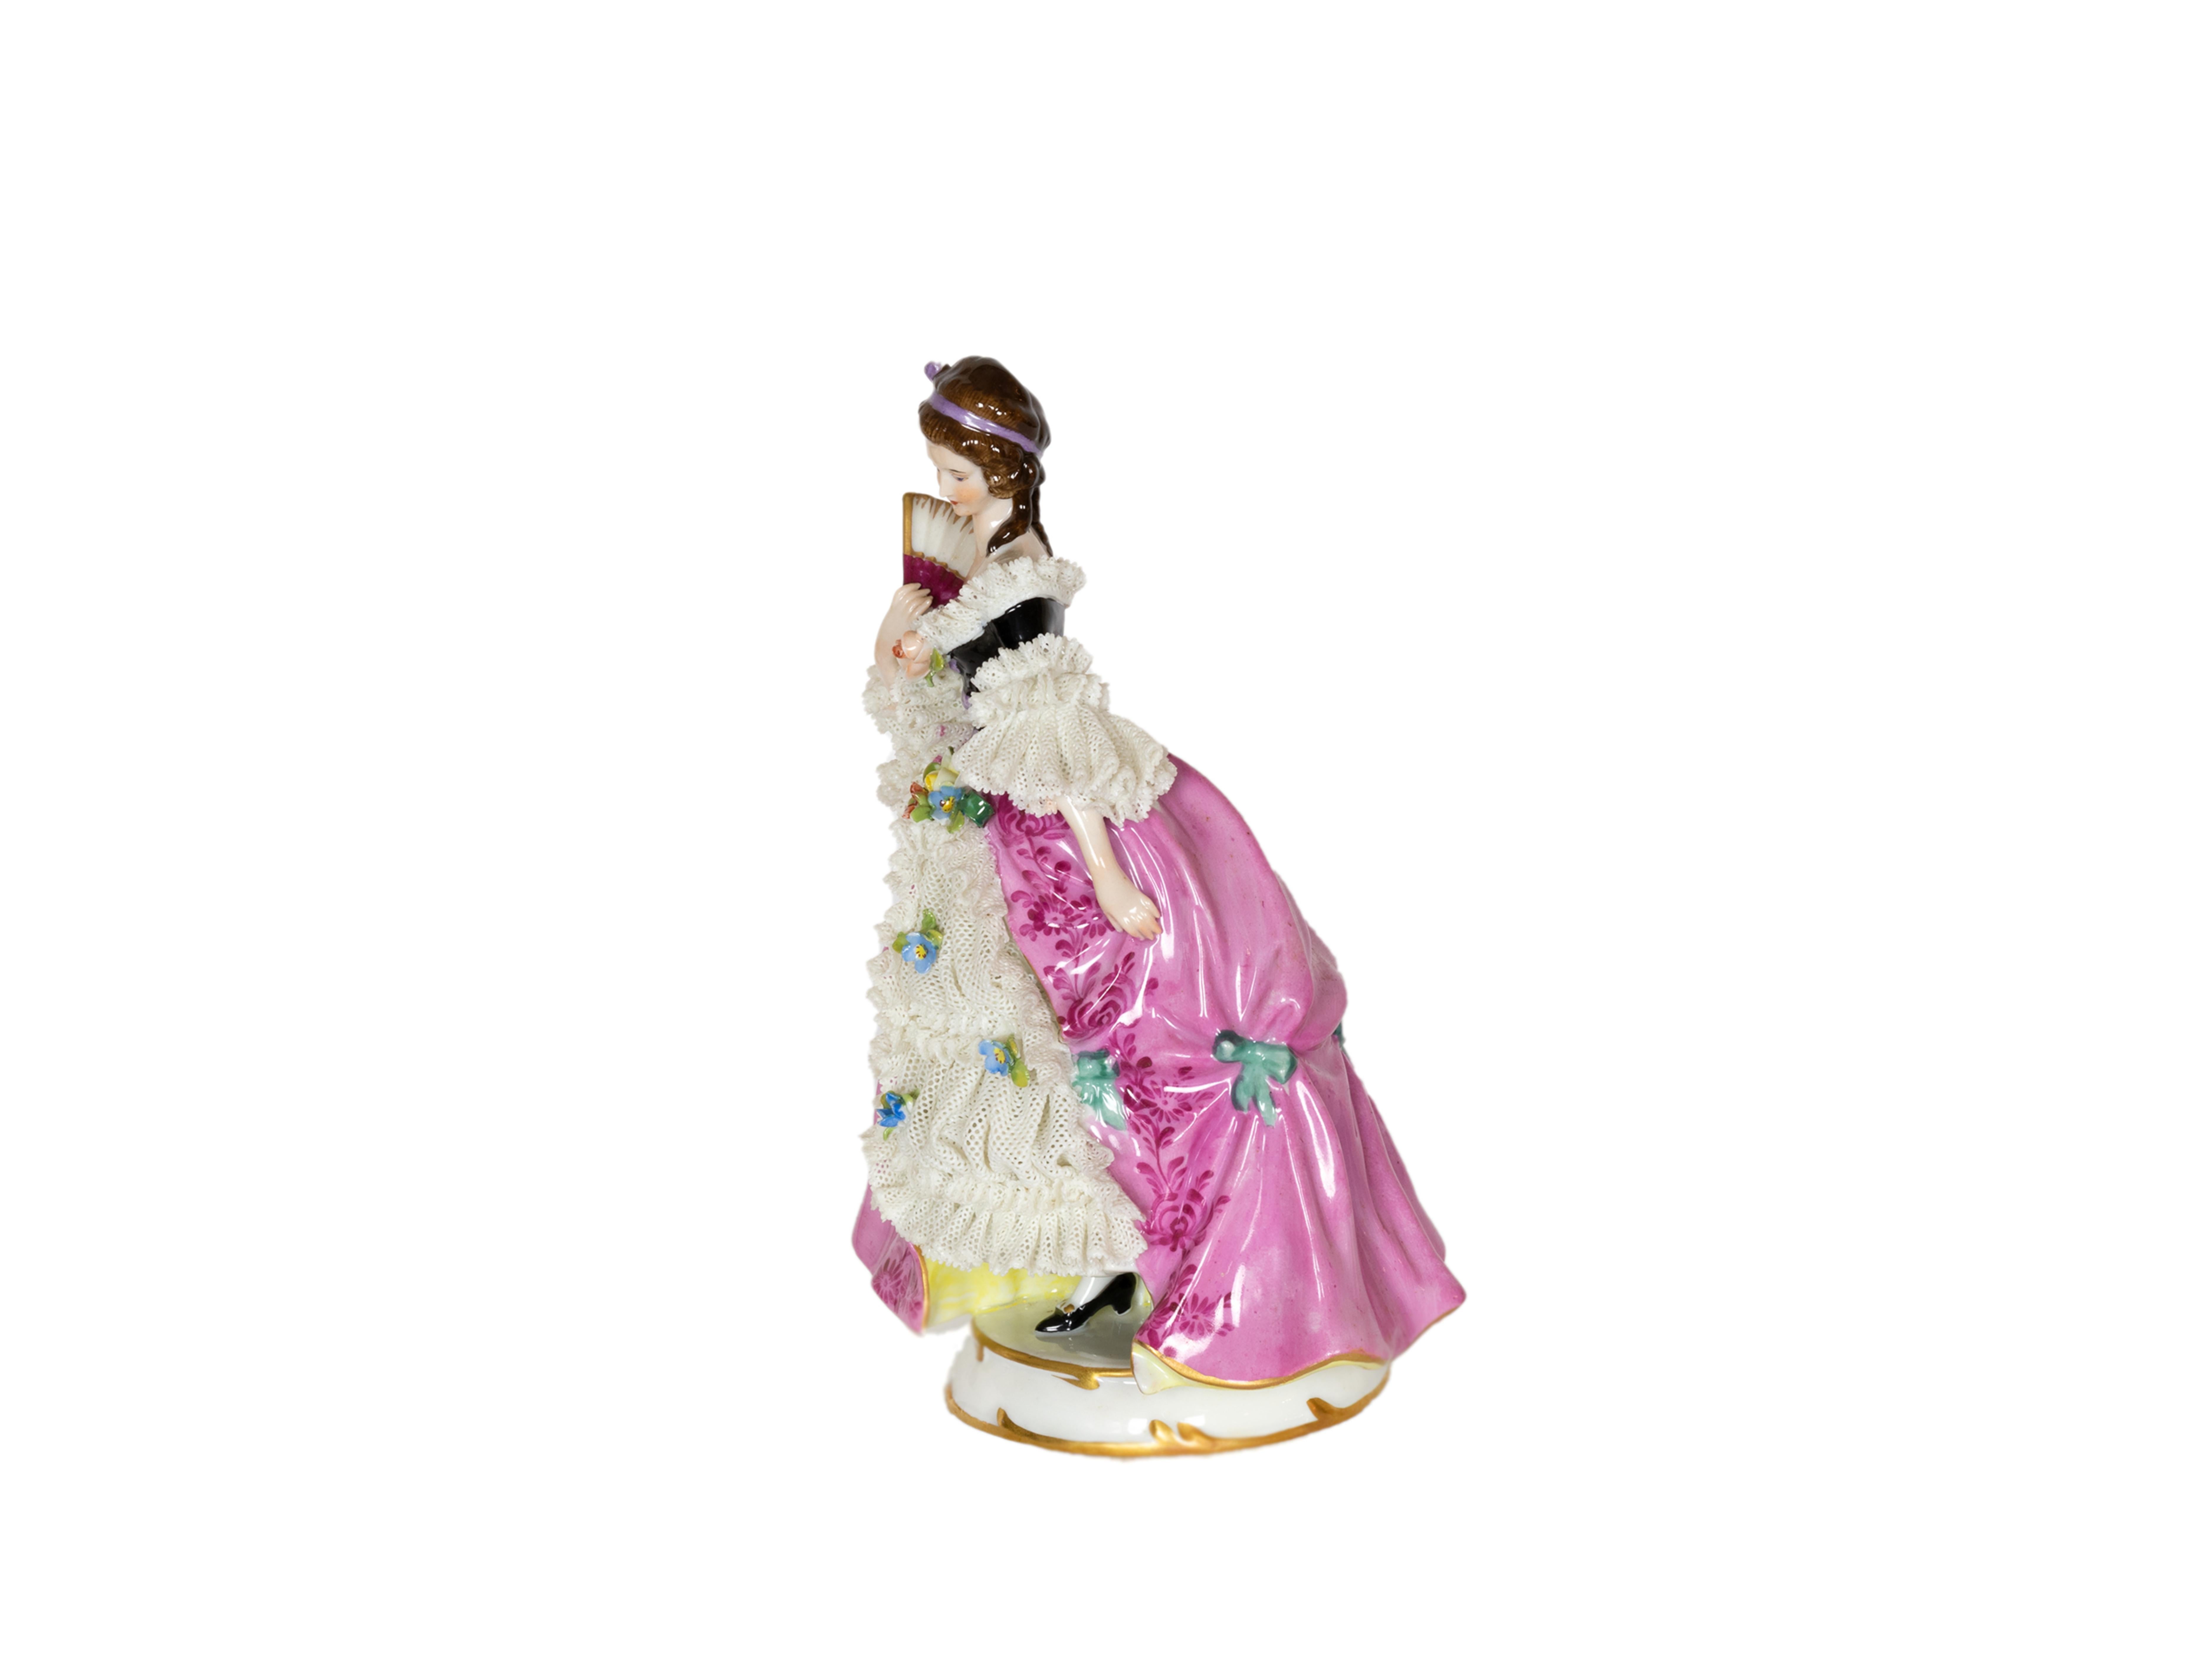 A Capadimonte's charming porcelain figure depicts a baroque styled woman dressed in pink and holding a fan.